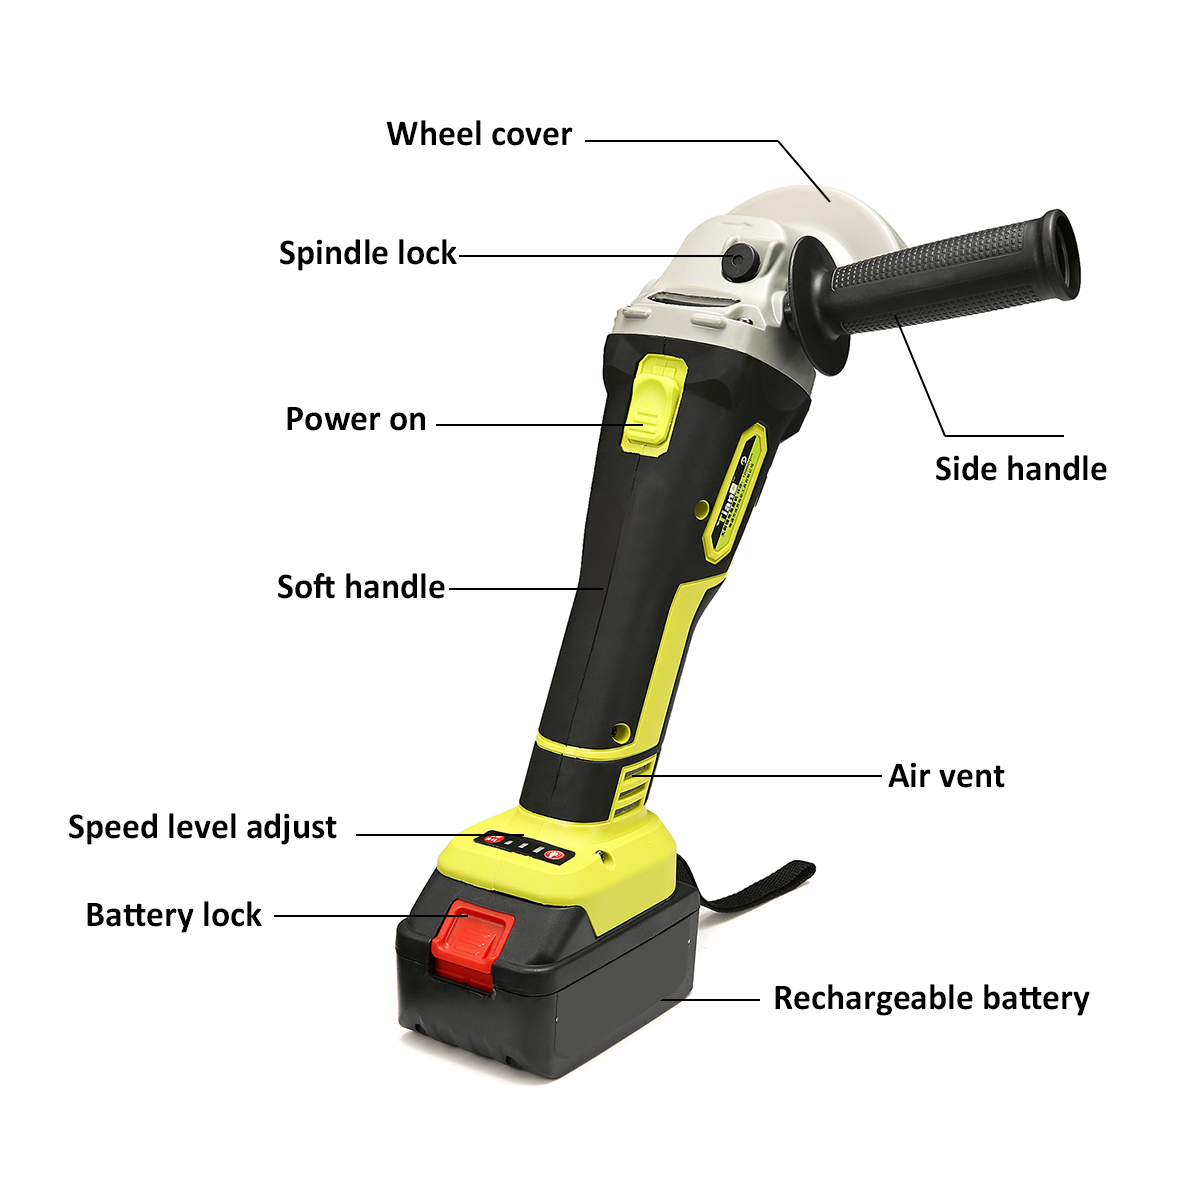 128VF-19800mAh-Lithium-Ion-Brushless-Cut-Off-Angle-Grinder-Cordless-Electric-Angle-Grinder-Power-Cut-1397283-6